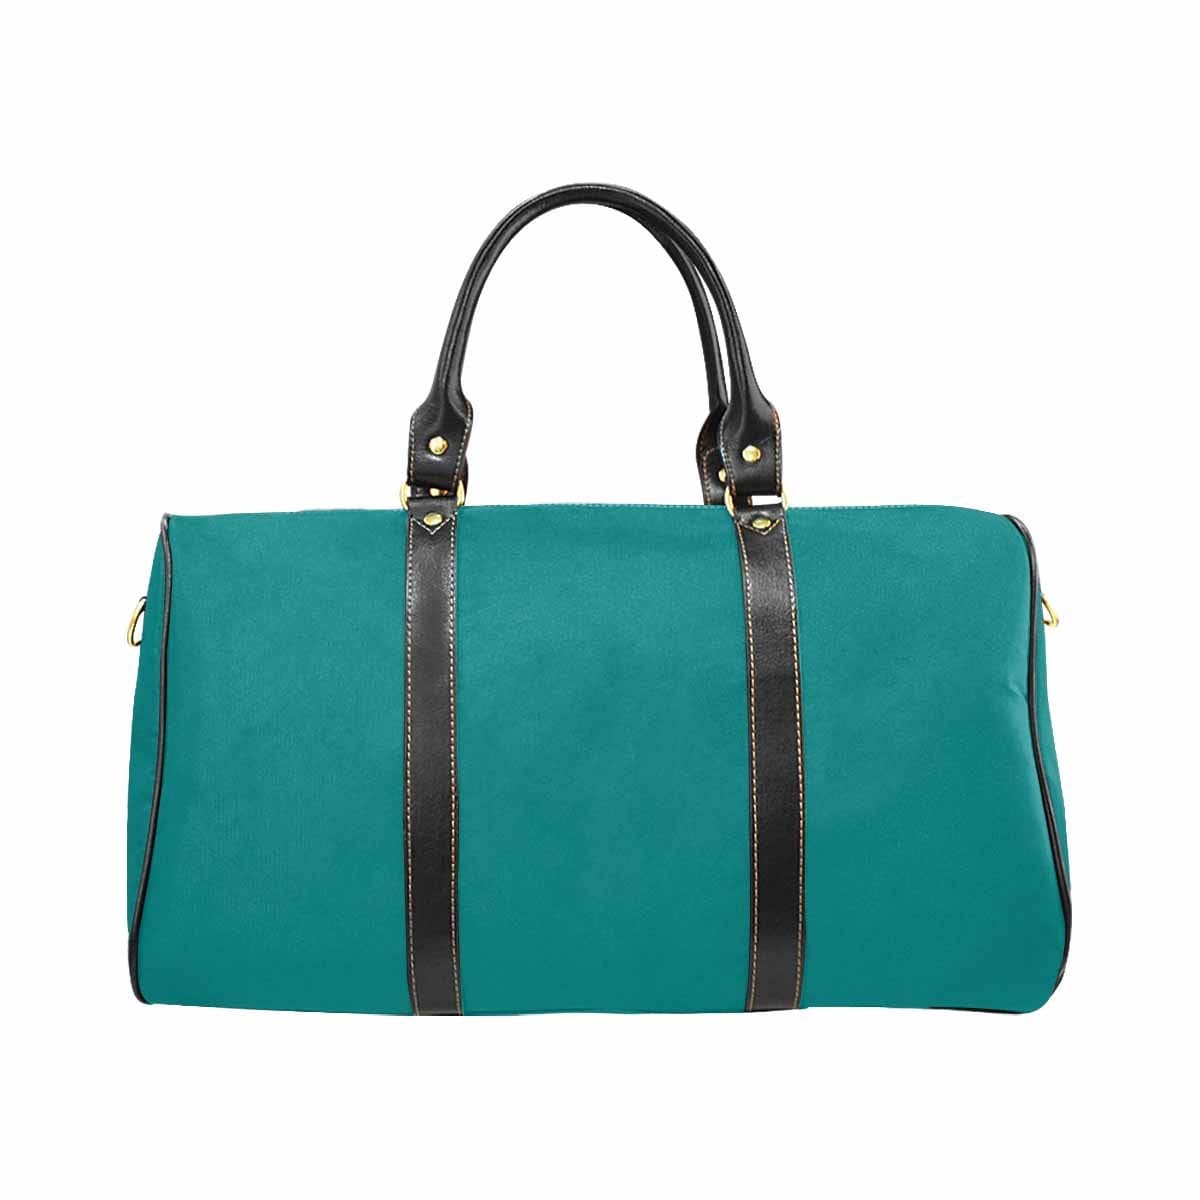 Travel Bag Leather Carry On Large Luggage Bag Dark Teal Green - Bags | Travel